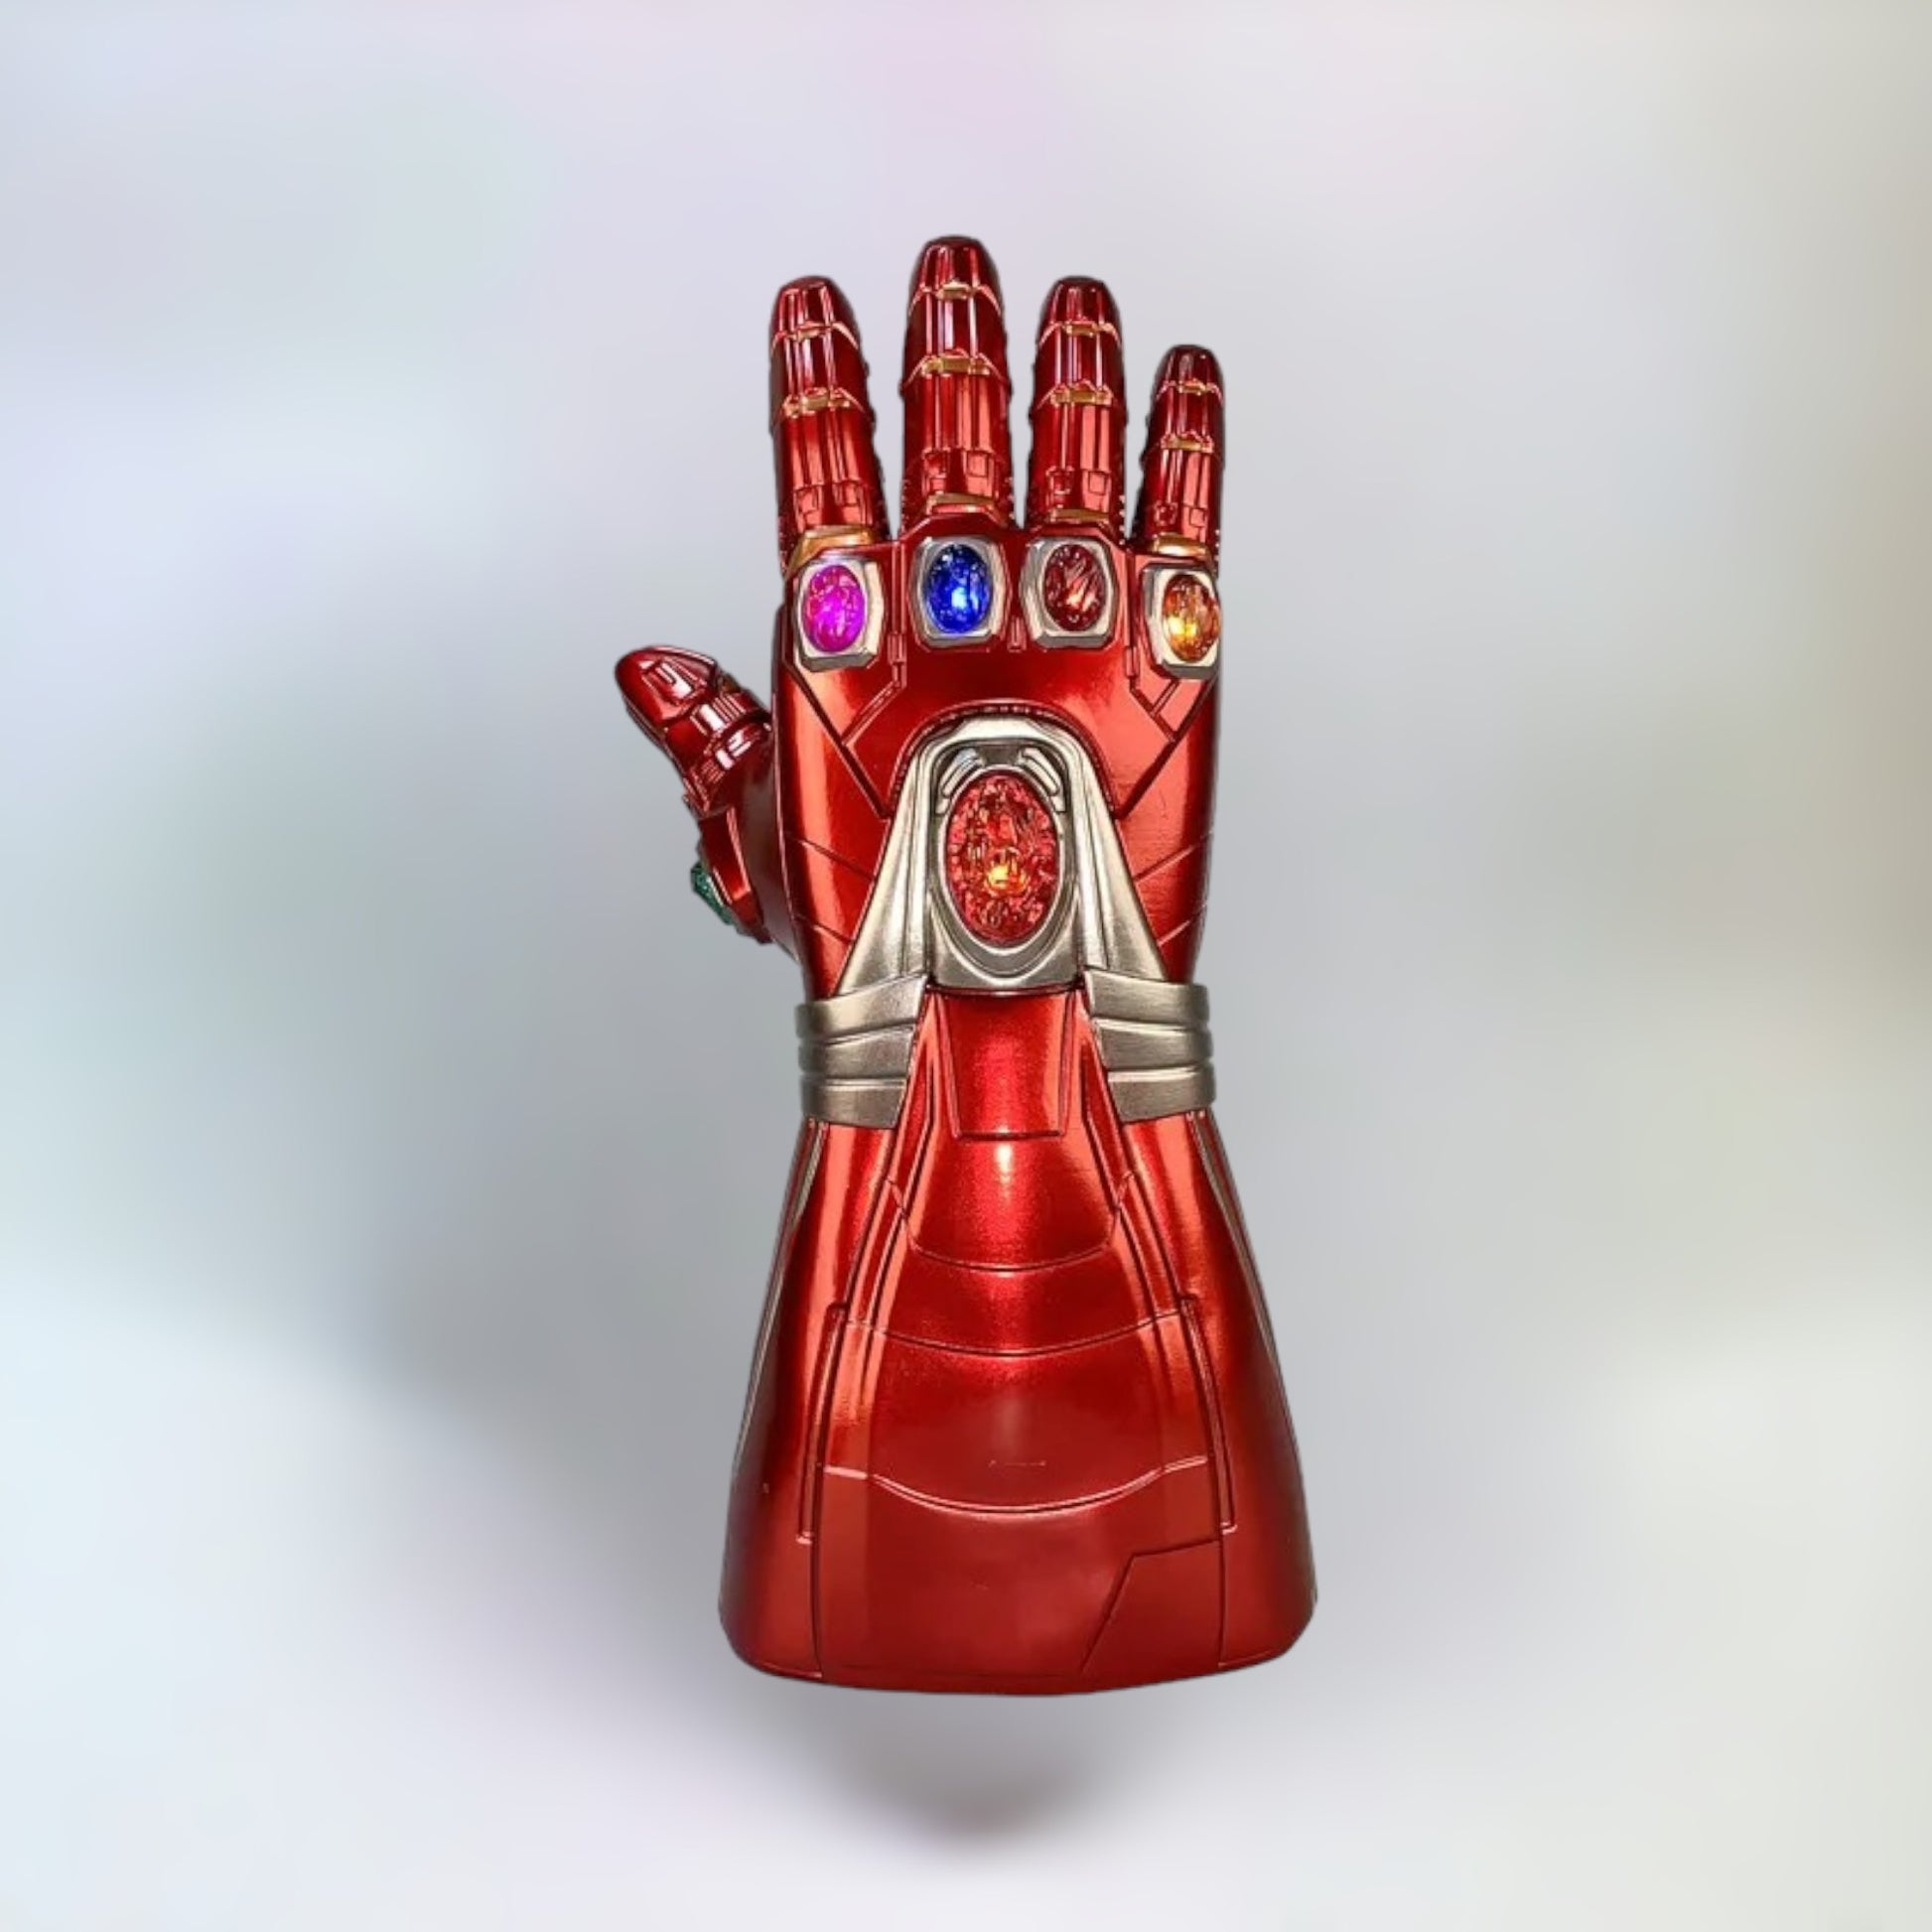 Ironman infinity gauntlet replica toy with plain white background